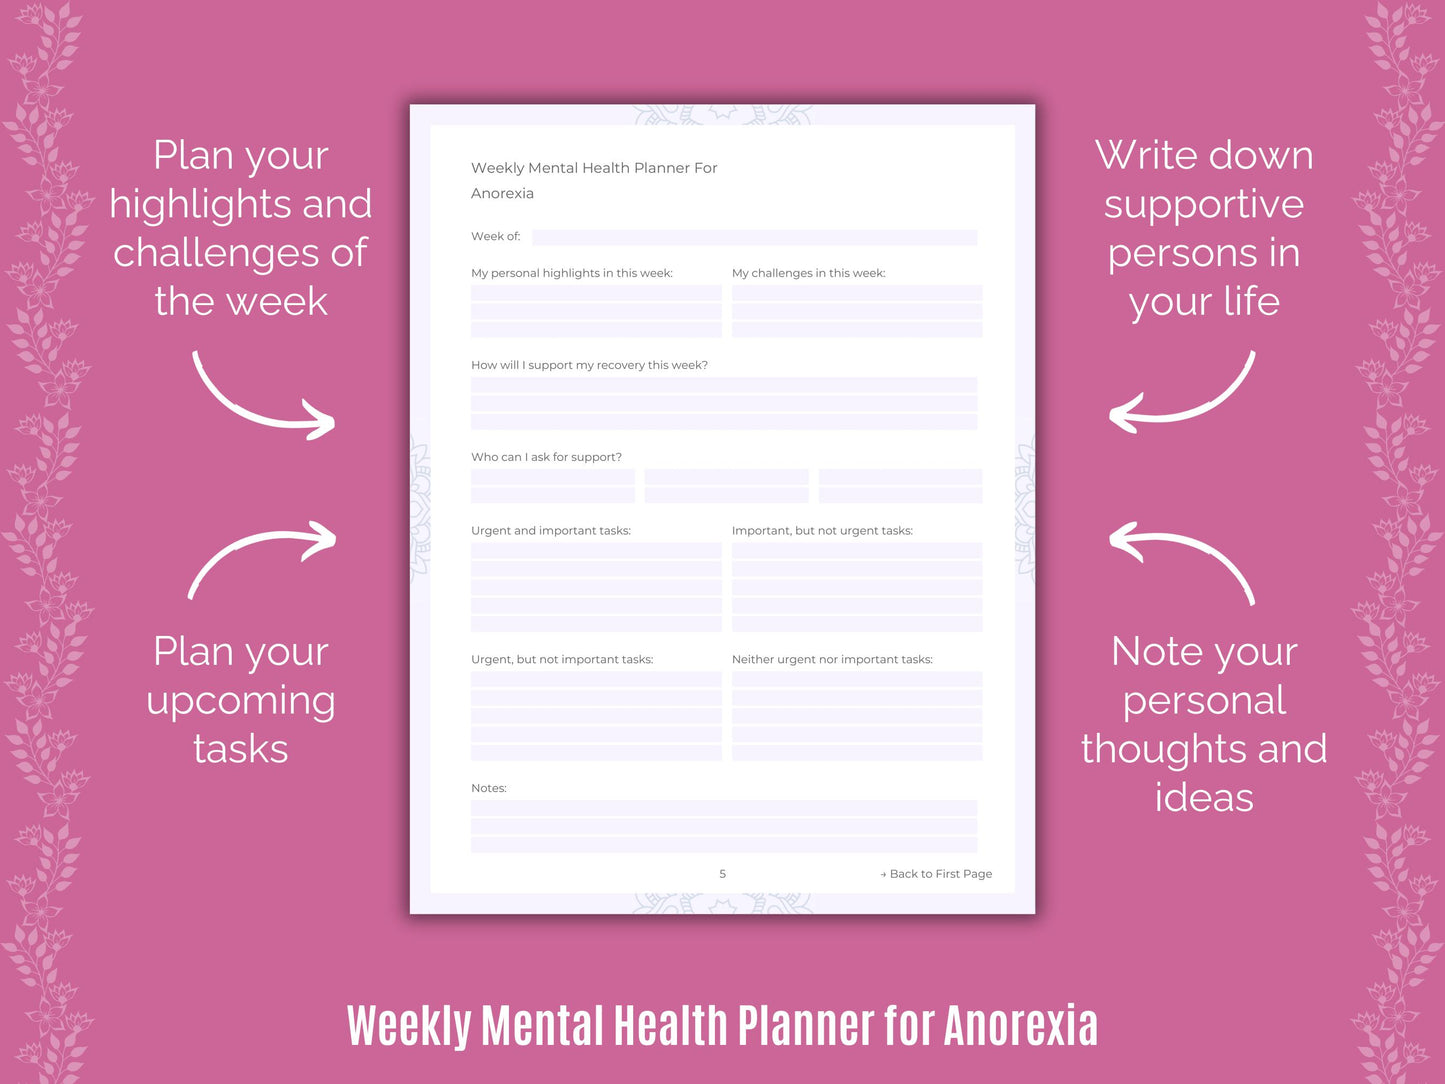 Anorexia Cheat Sheet, Anorexia Counseling, Anorexia Journals, Anorexia Mental Health, Anorexia Resources, Anorexia Therapy, Anorexia Notes, Goal Setting, Anorexia Planners, Anorexia Workbooks, Anorexia Templates, Anorexia Tools, Anorexia Journaling